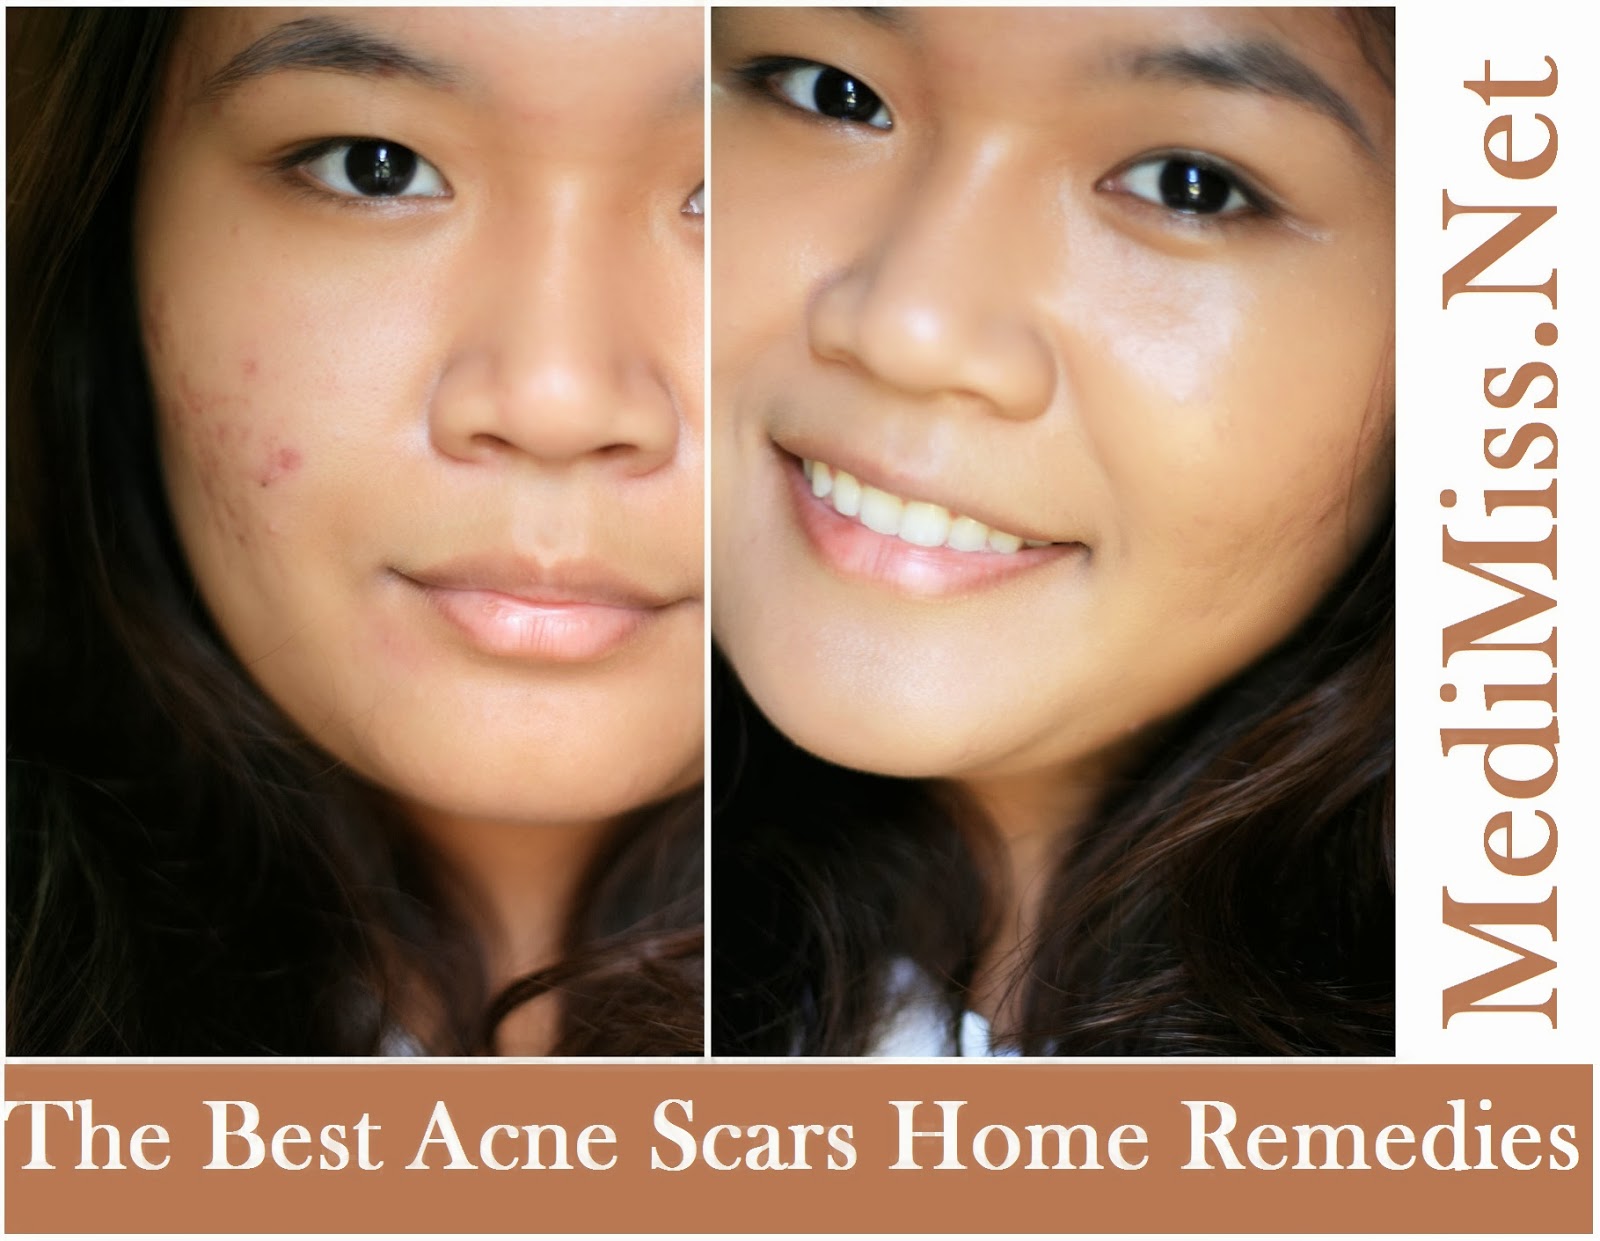 What are some home remedies for clear skin?